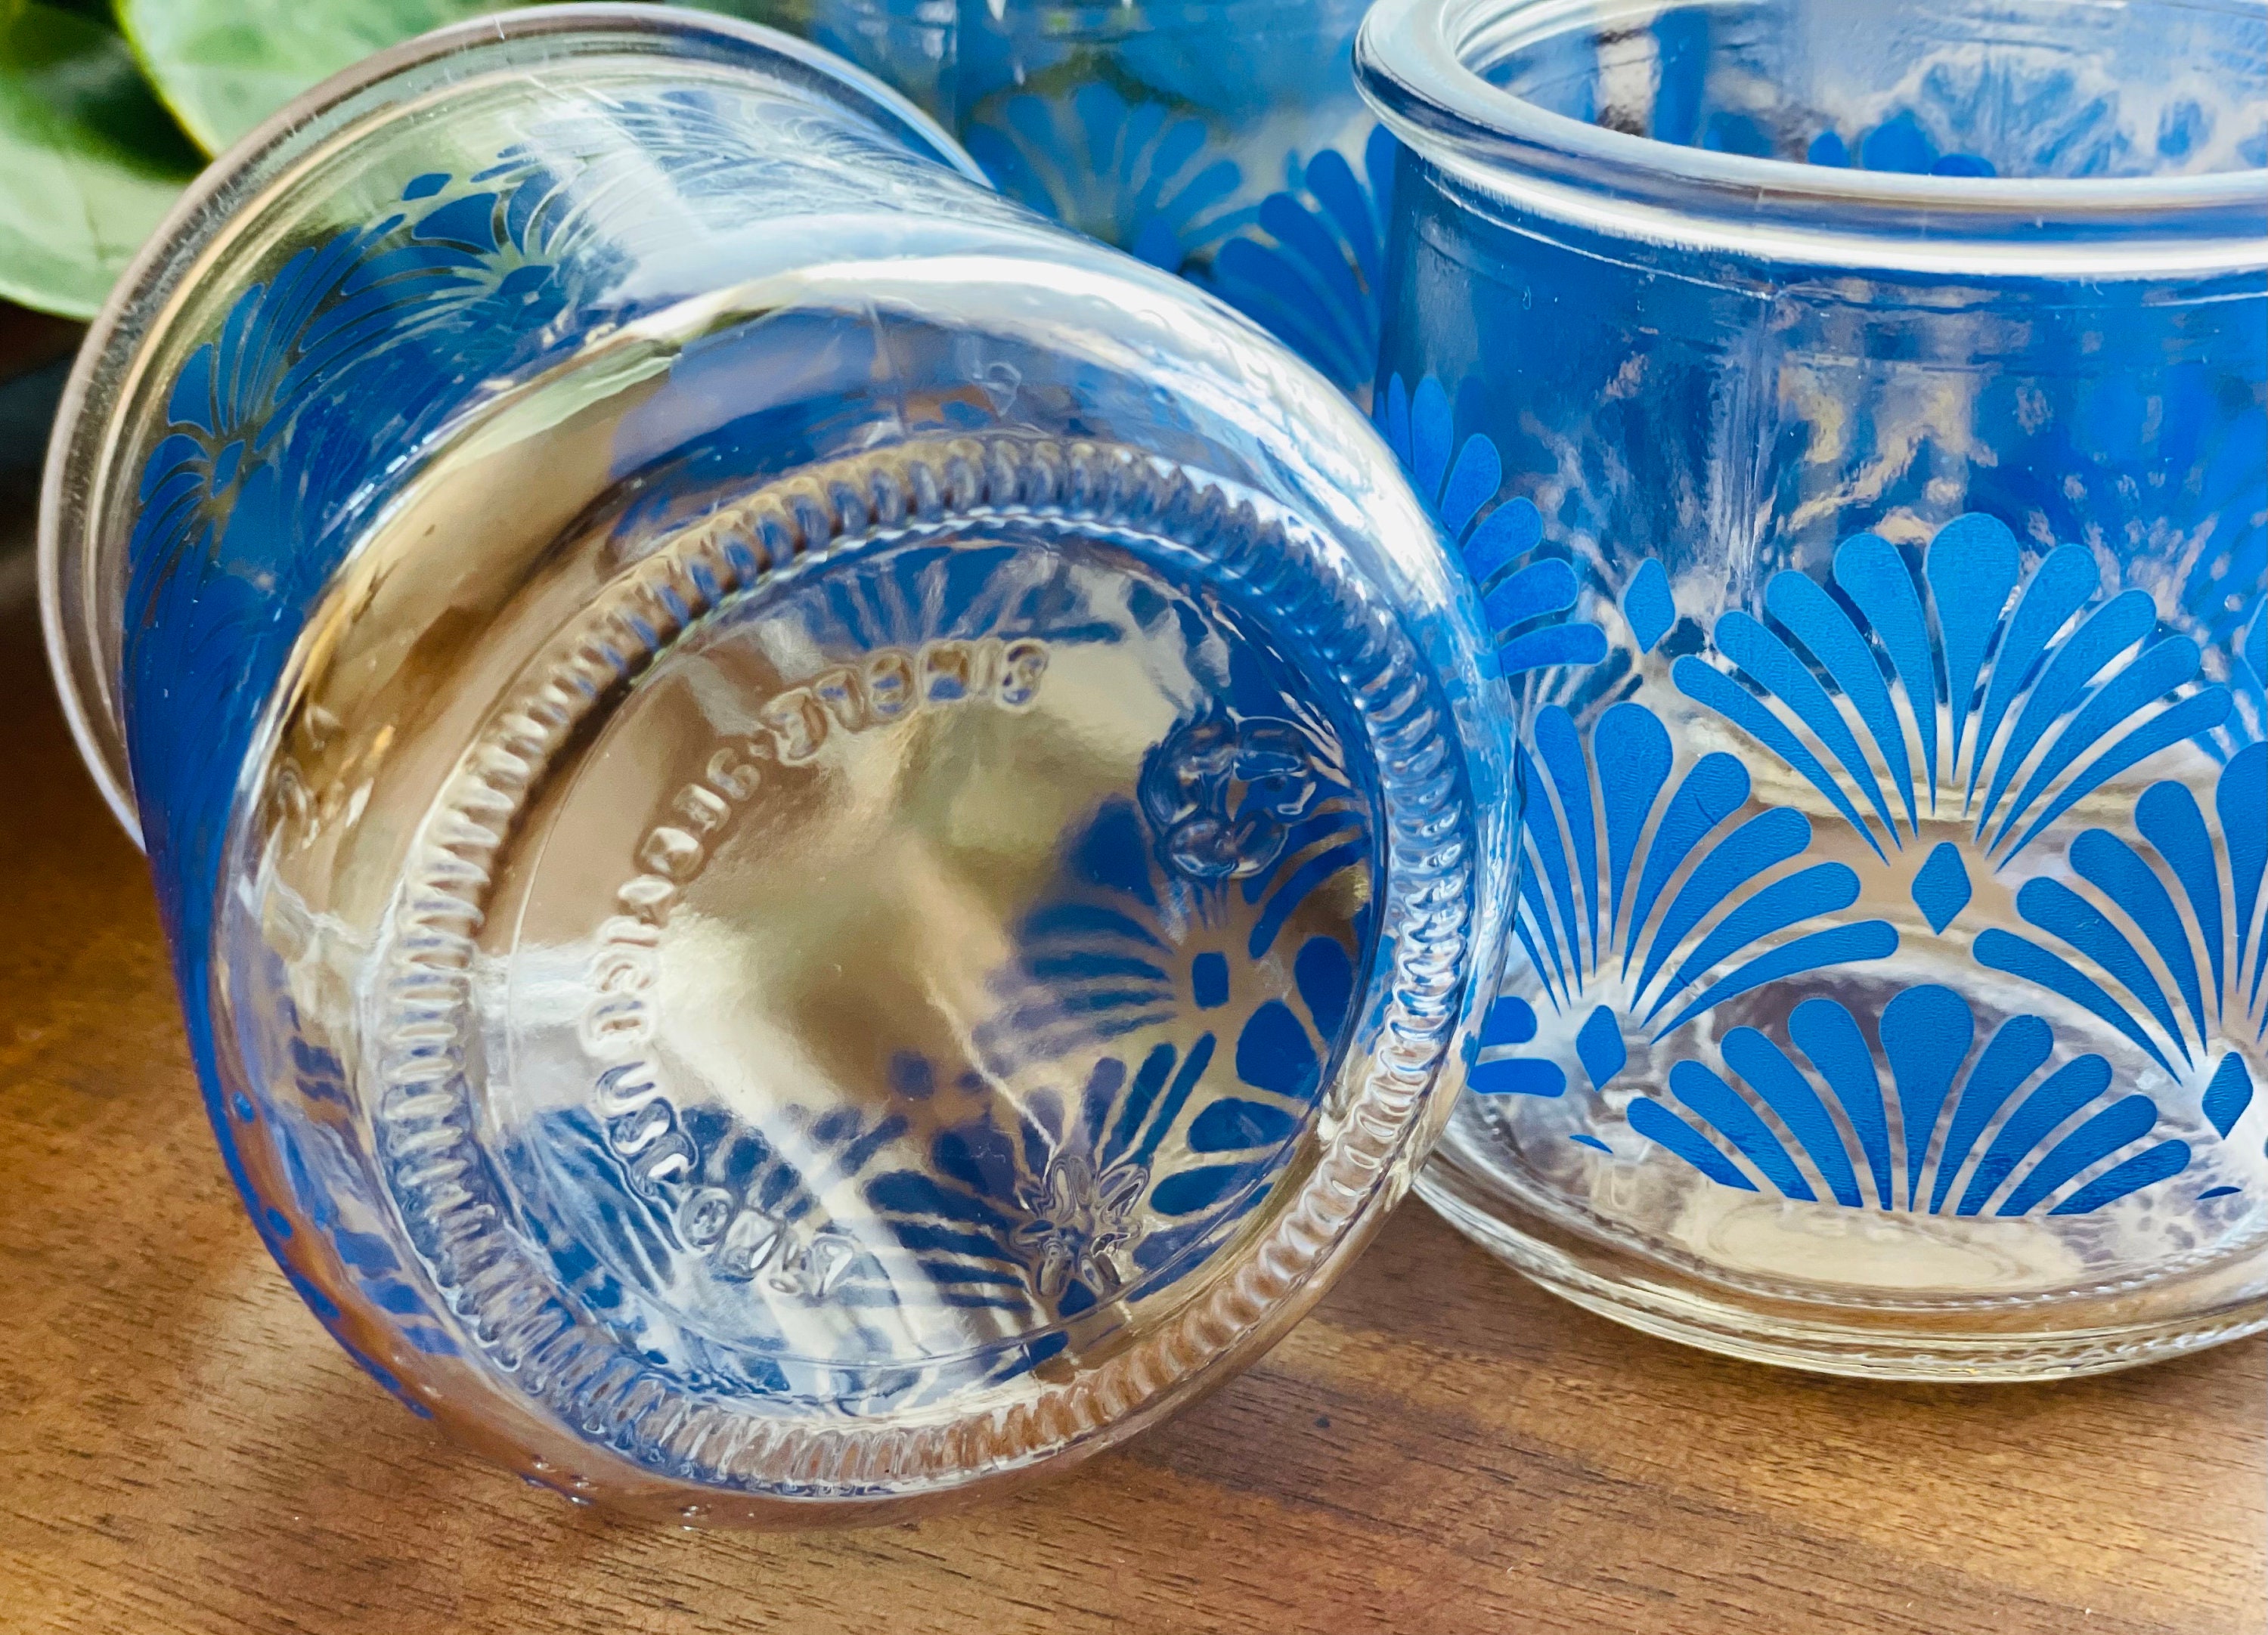 Erin Reed Makes: DIY Upcycled Stained Glass Containers from Oui Yogurt Jars